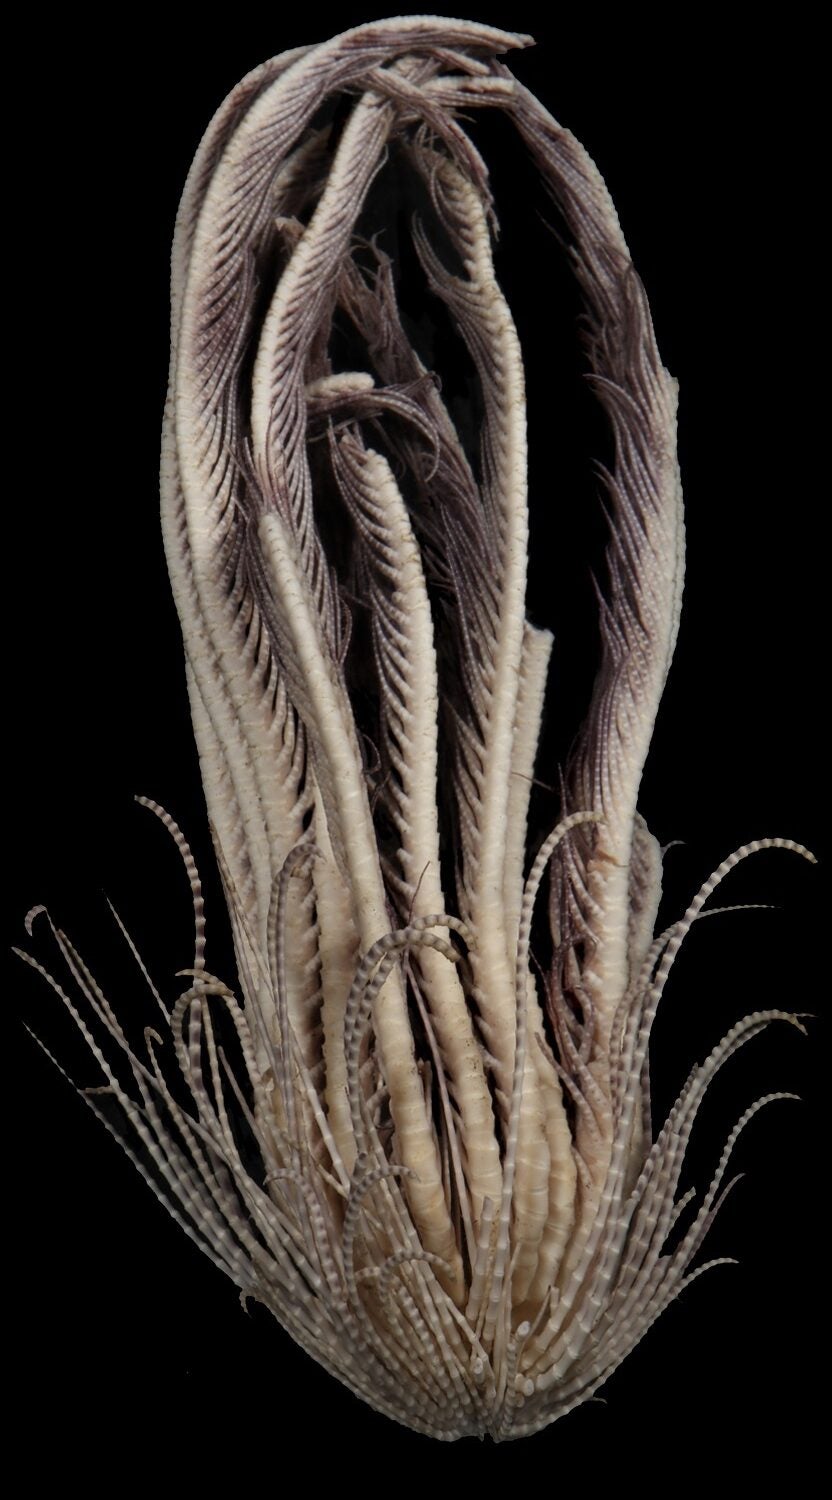 Long-limbed feather star.